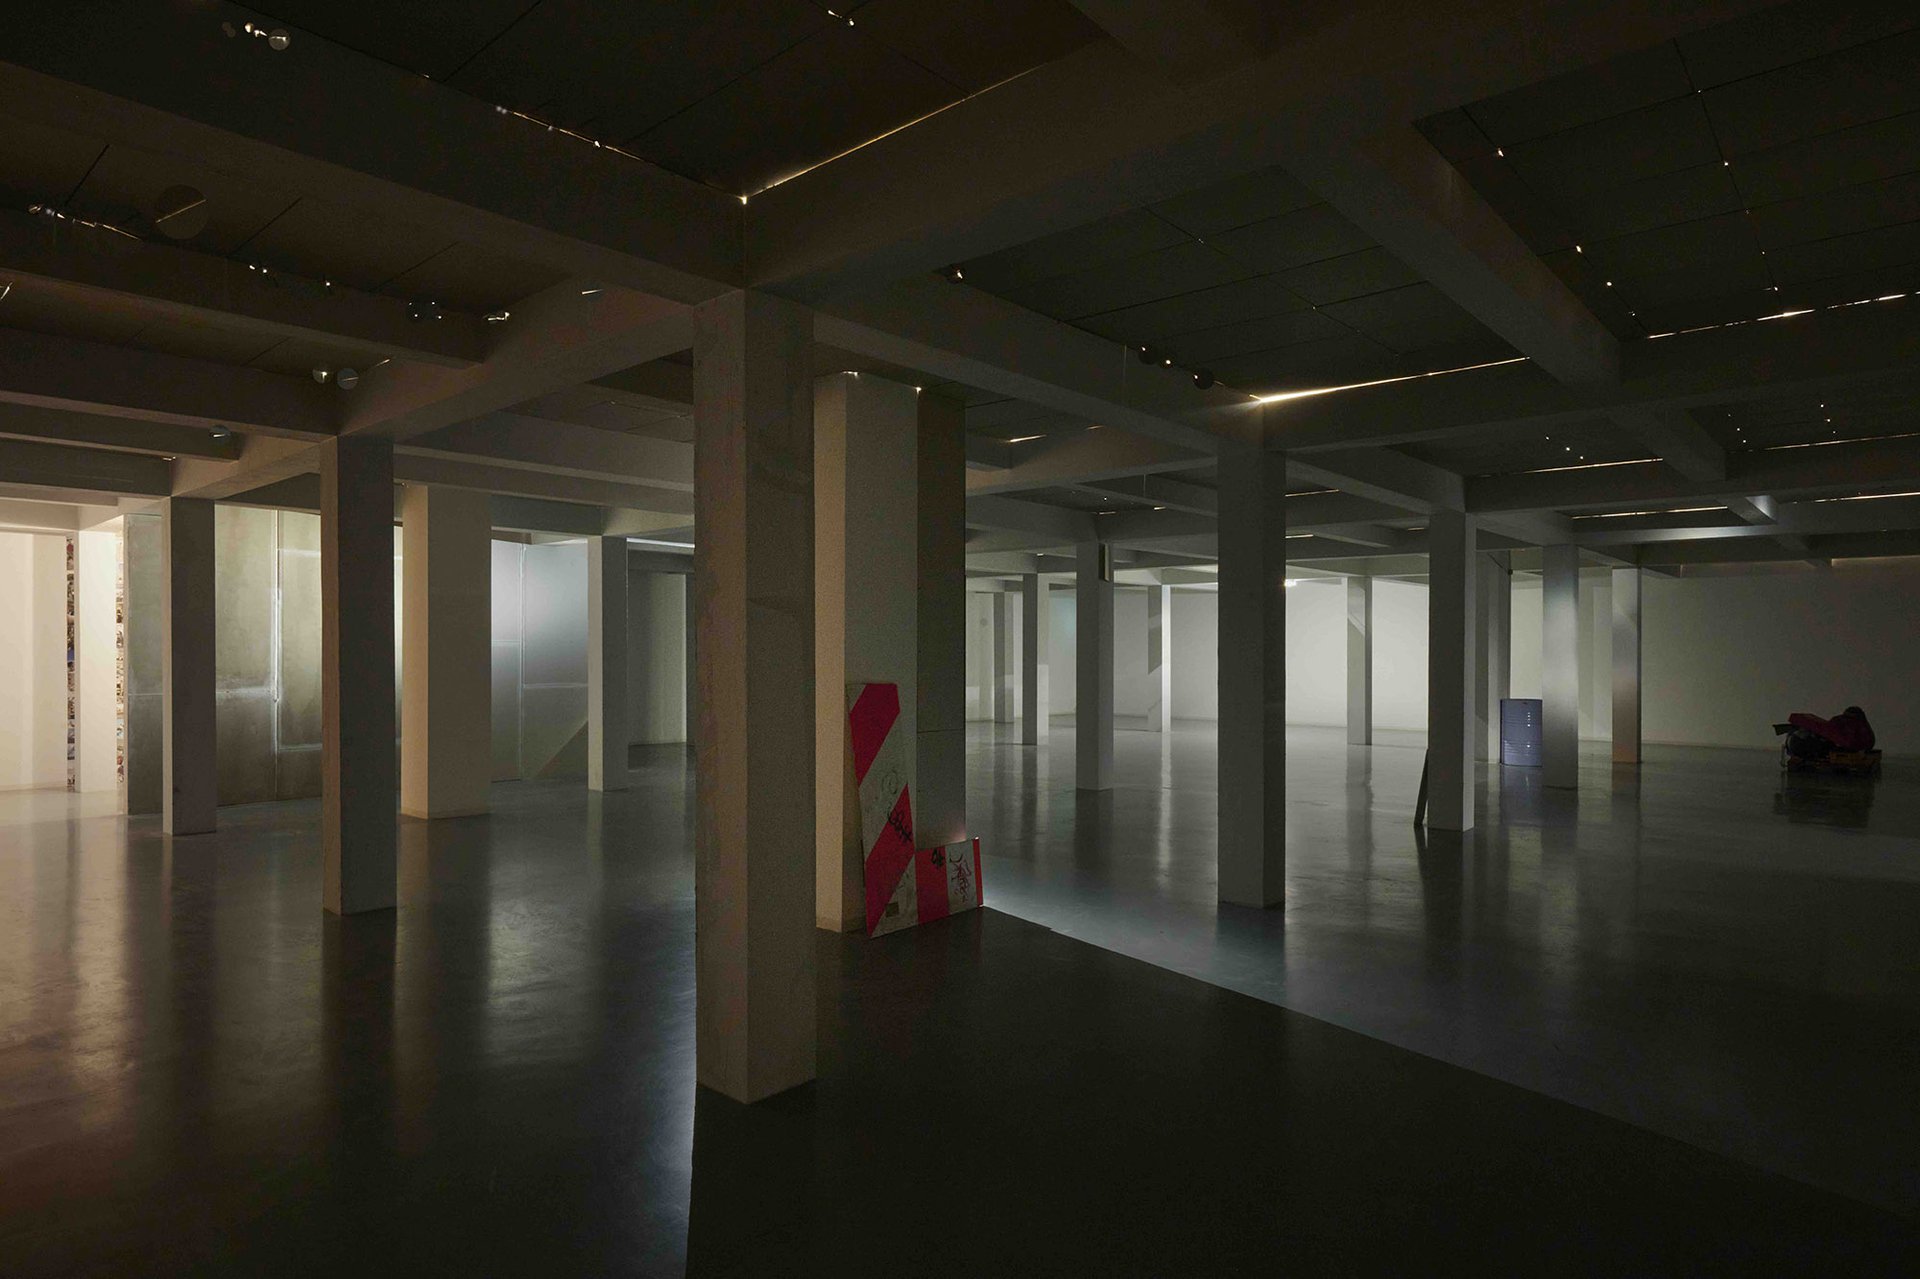 Tolia Astakhishvili, Entire, 2023, plaster boards, filler, ventilation shaft grille, pipe, building sight sign, gym mats, punch bag, artificial snow, lamps, sound, 6 m high ceiling suspended to 3 m x 15 m x 22,8 m.